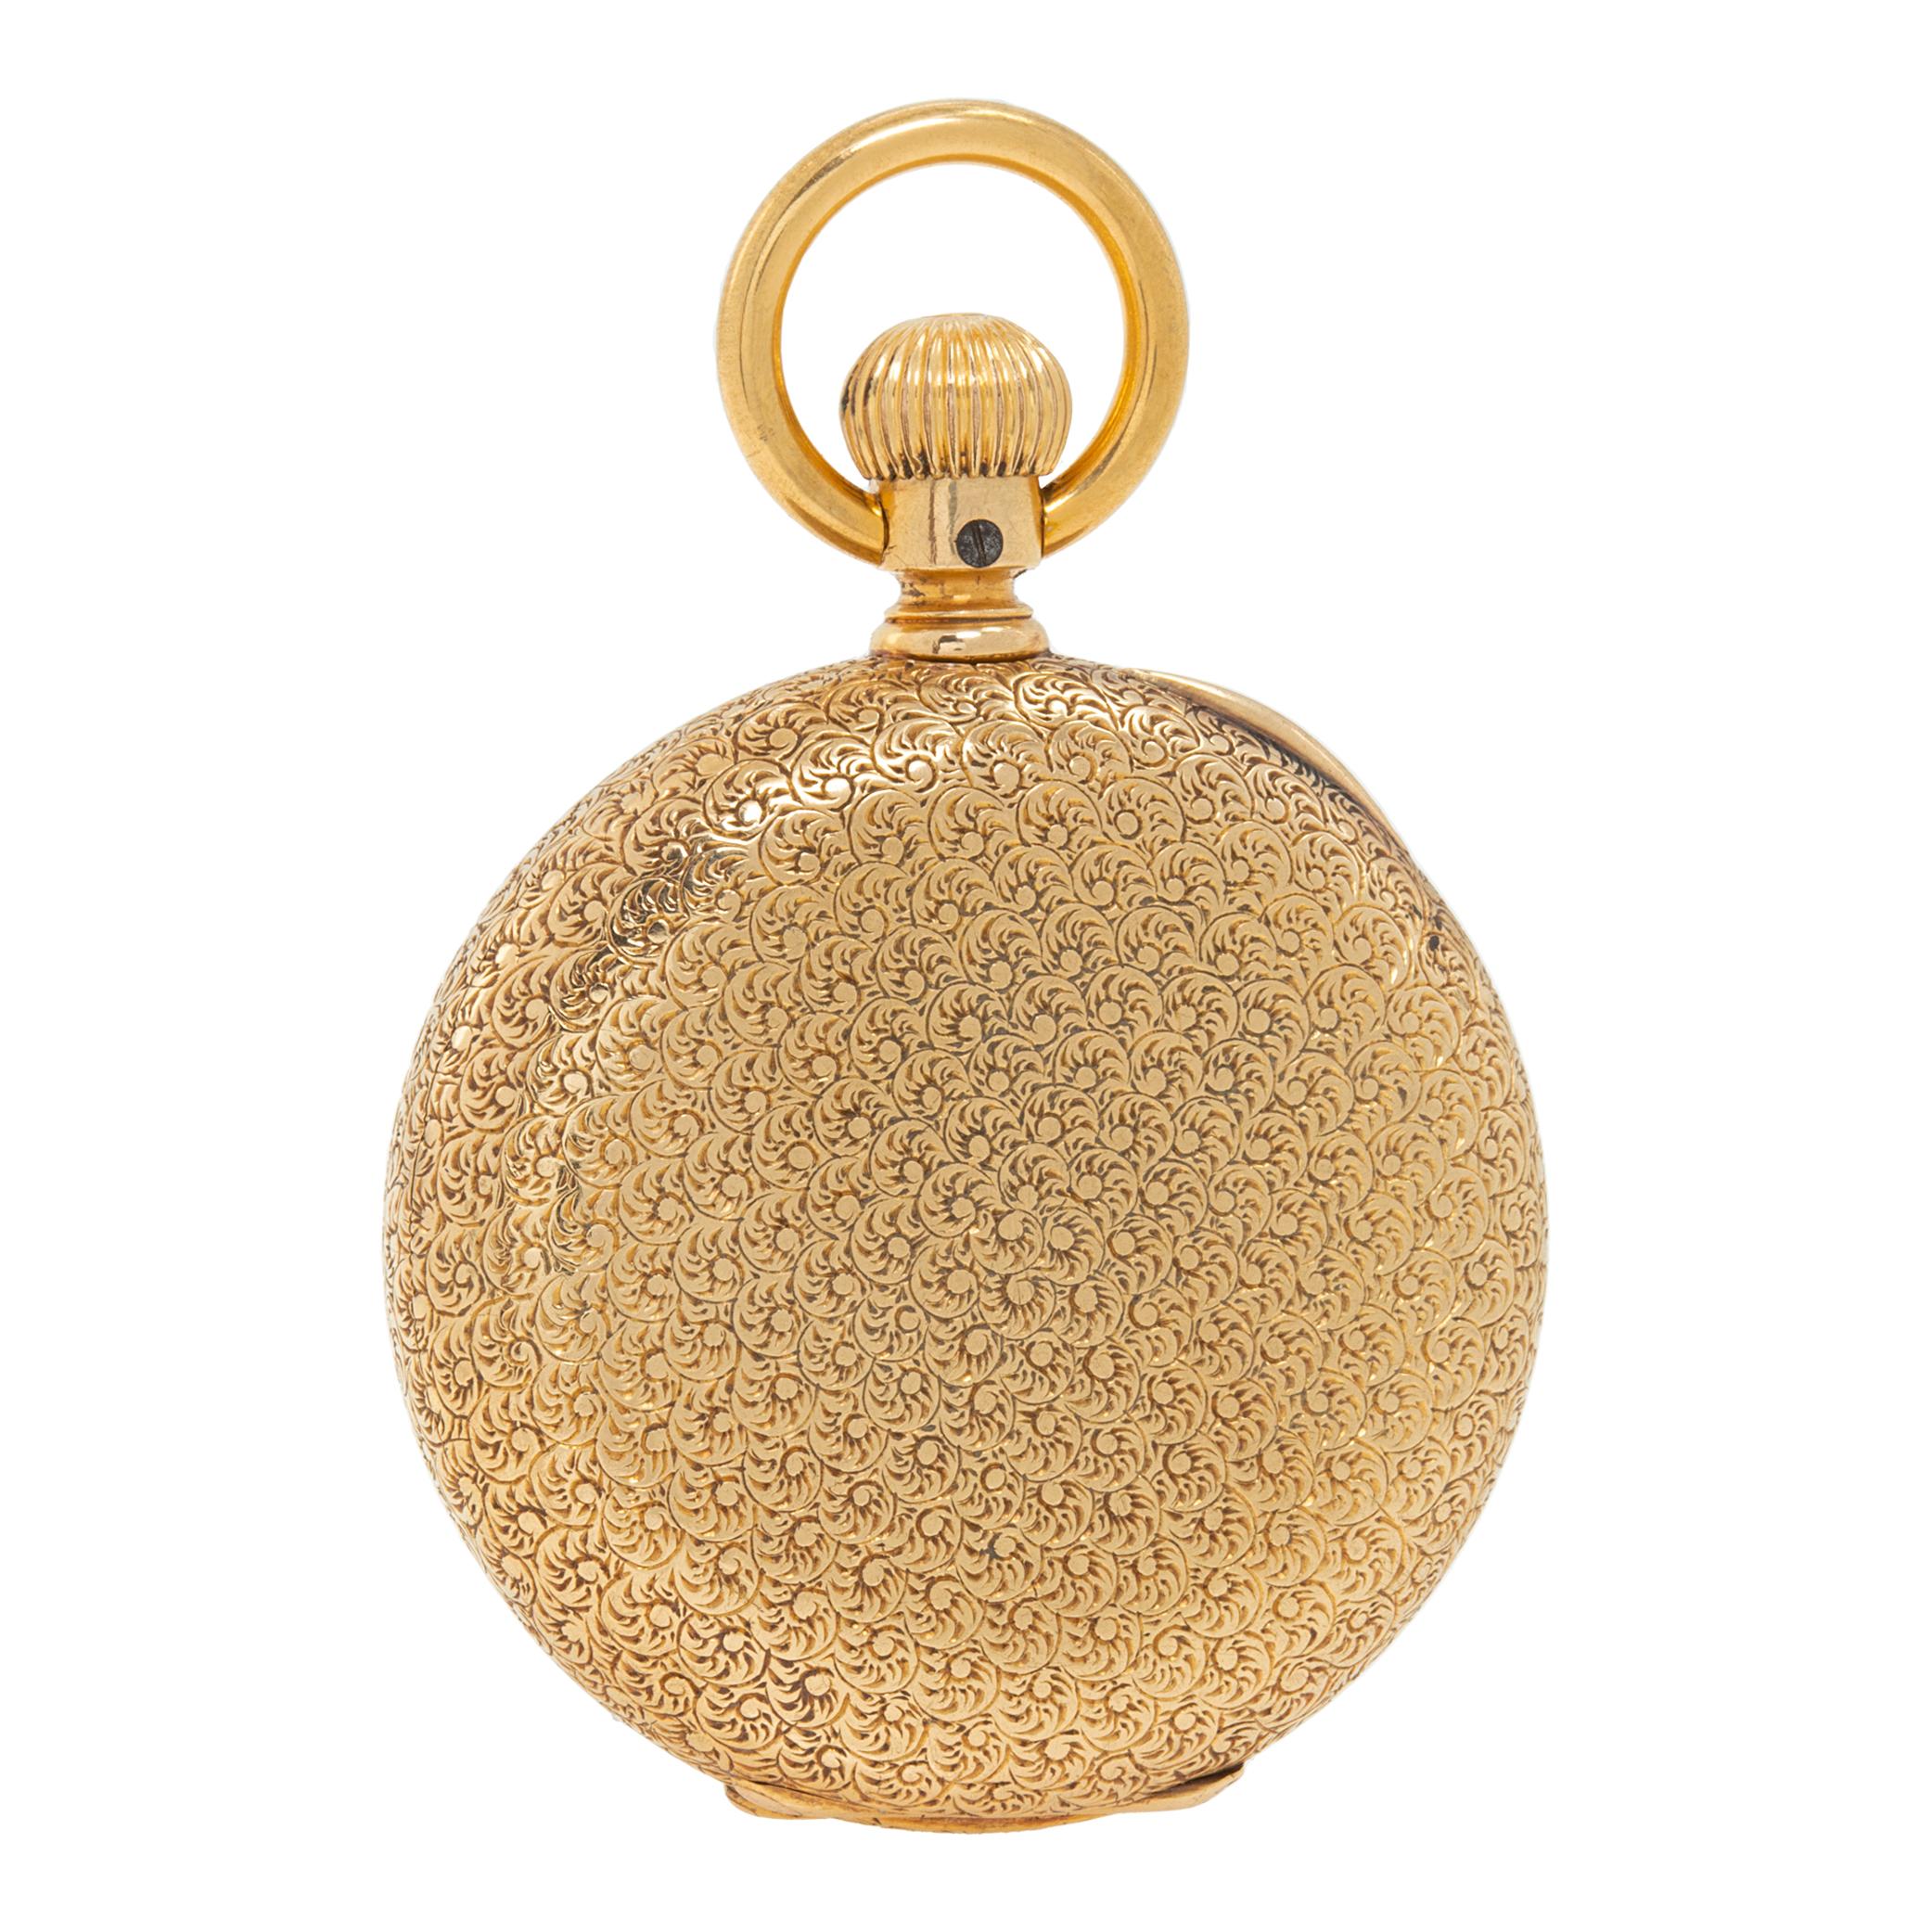 Tiffany & Co. 18k yellow gold Manual pocket watch In Excellent Condition For Sale In Surfside, FL